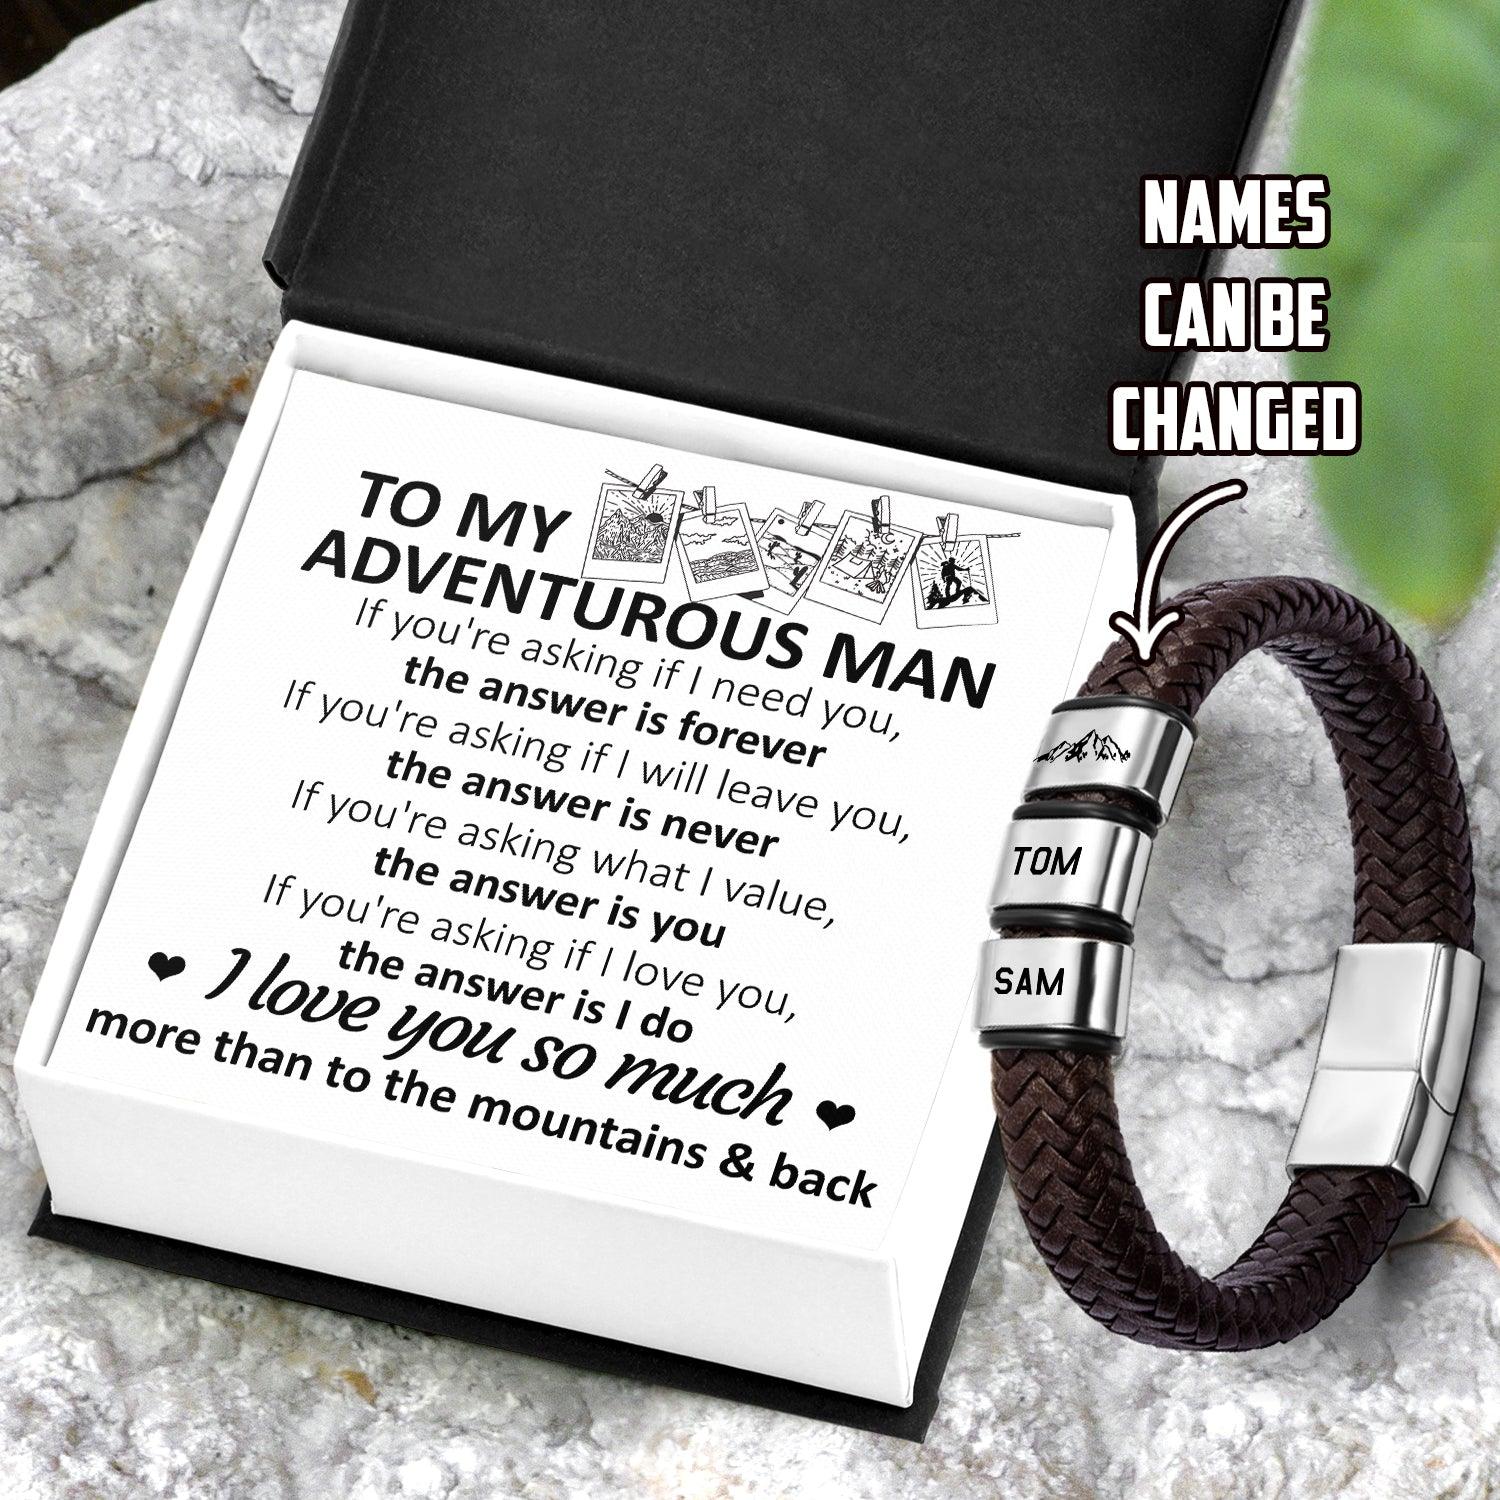 Personalized Leather Bracelet - Hiking - To My Adventurous Man - I Love You So Much More Than To The Mountains & Back - Augbzl26033 - Gifts Holder